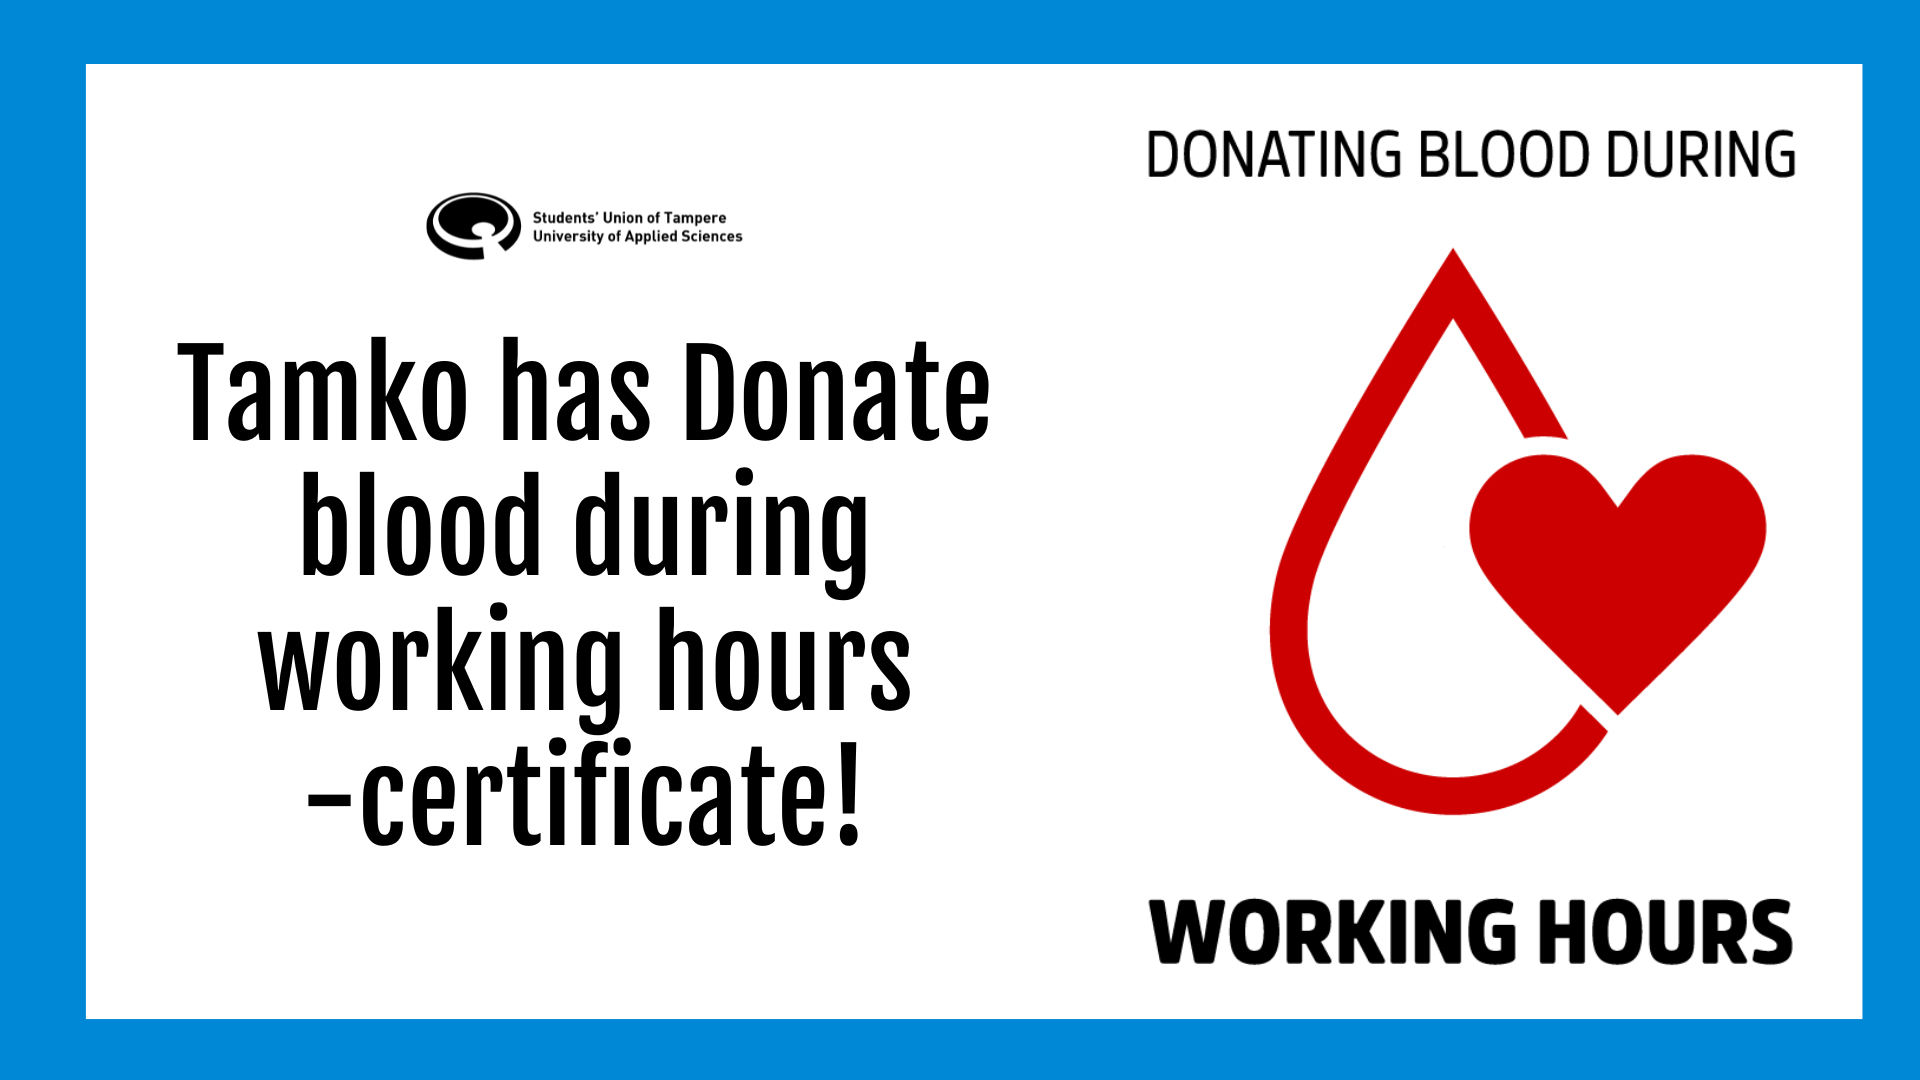 Tamko has Donate blood during working hours -certificate now!